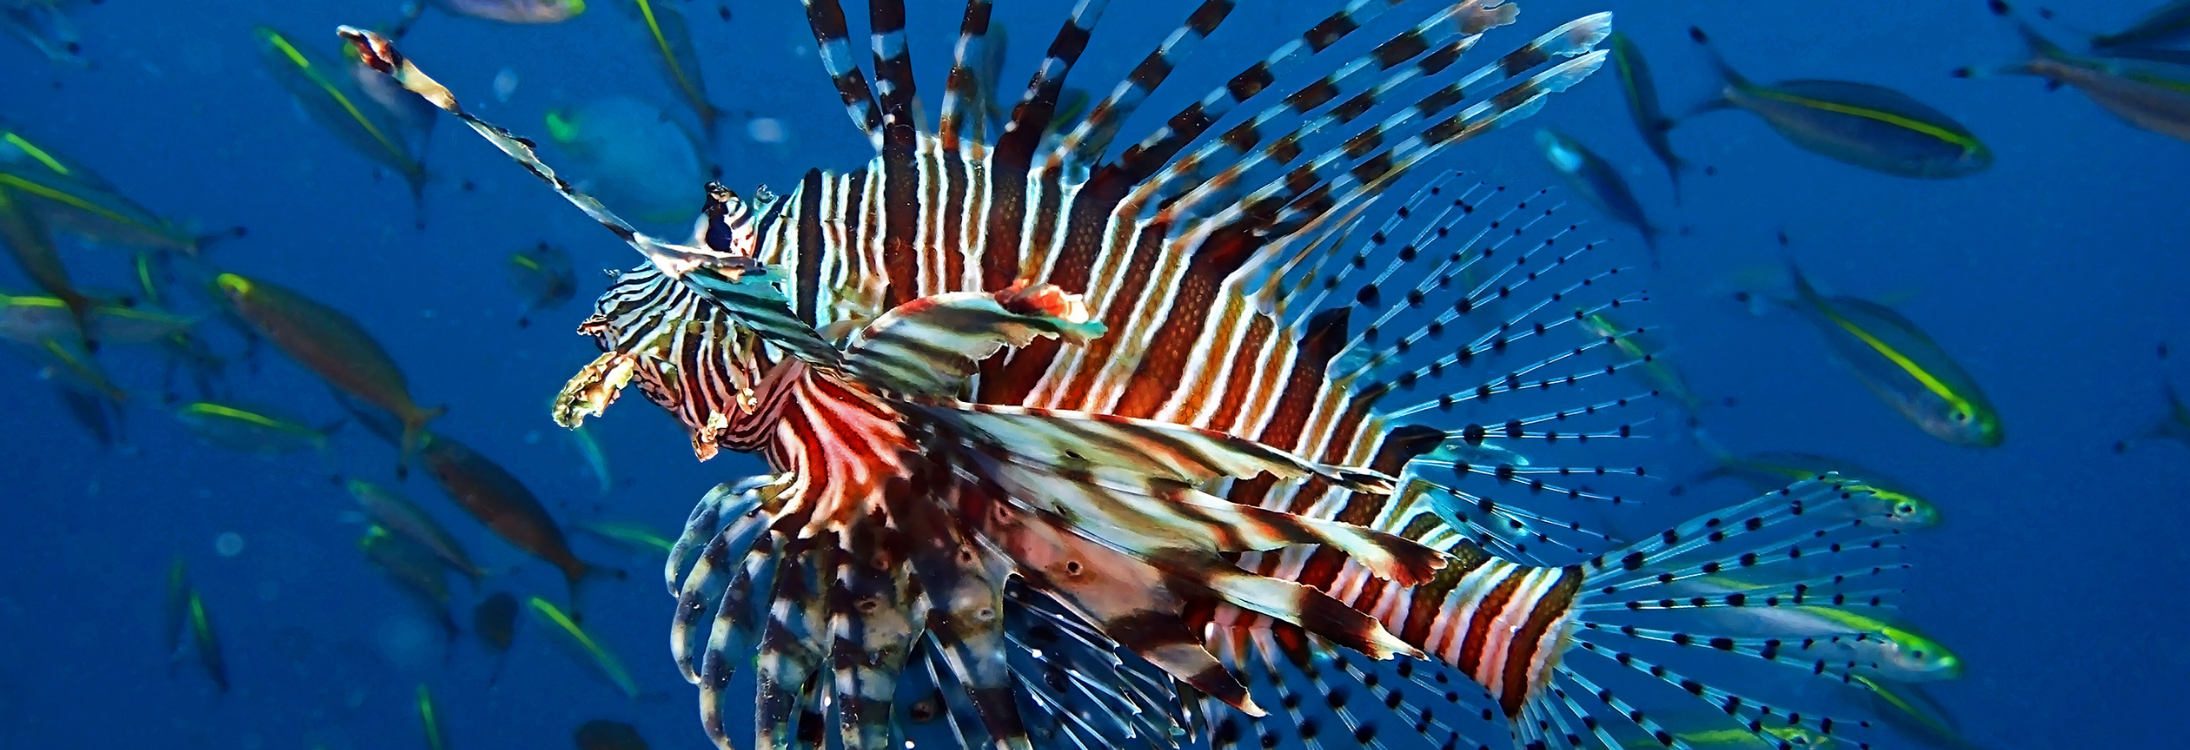 Lionfish herding some Yellowtail Snappers